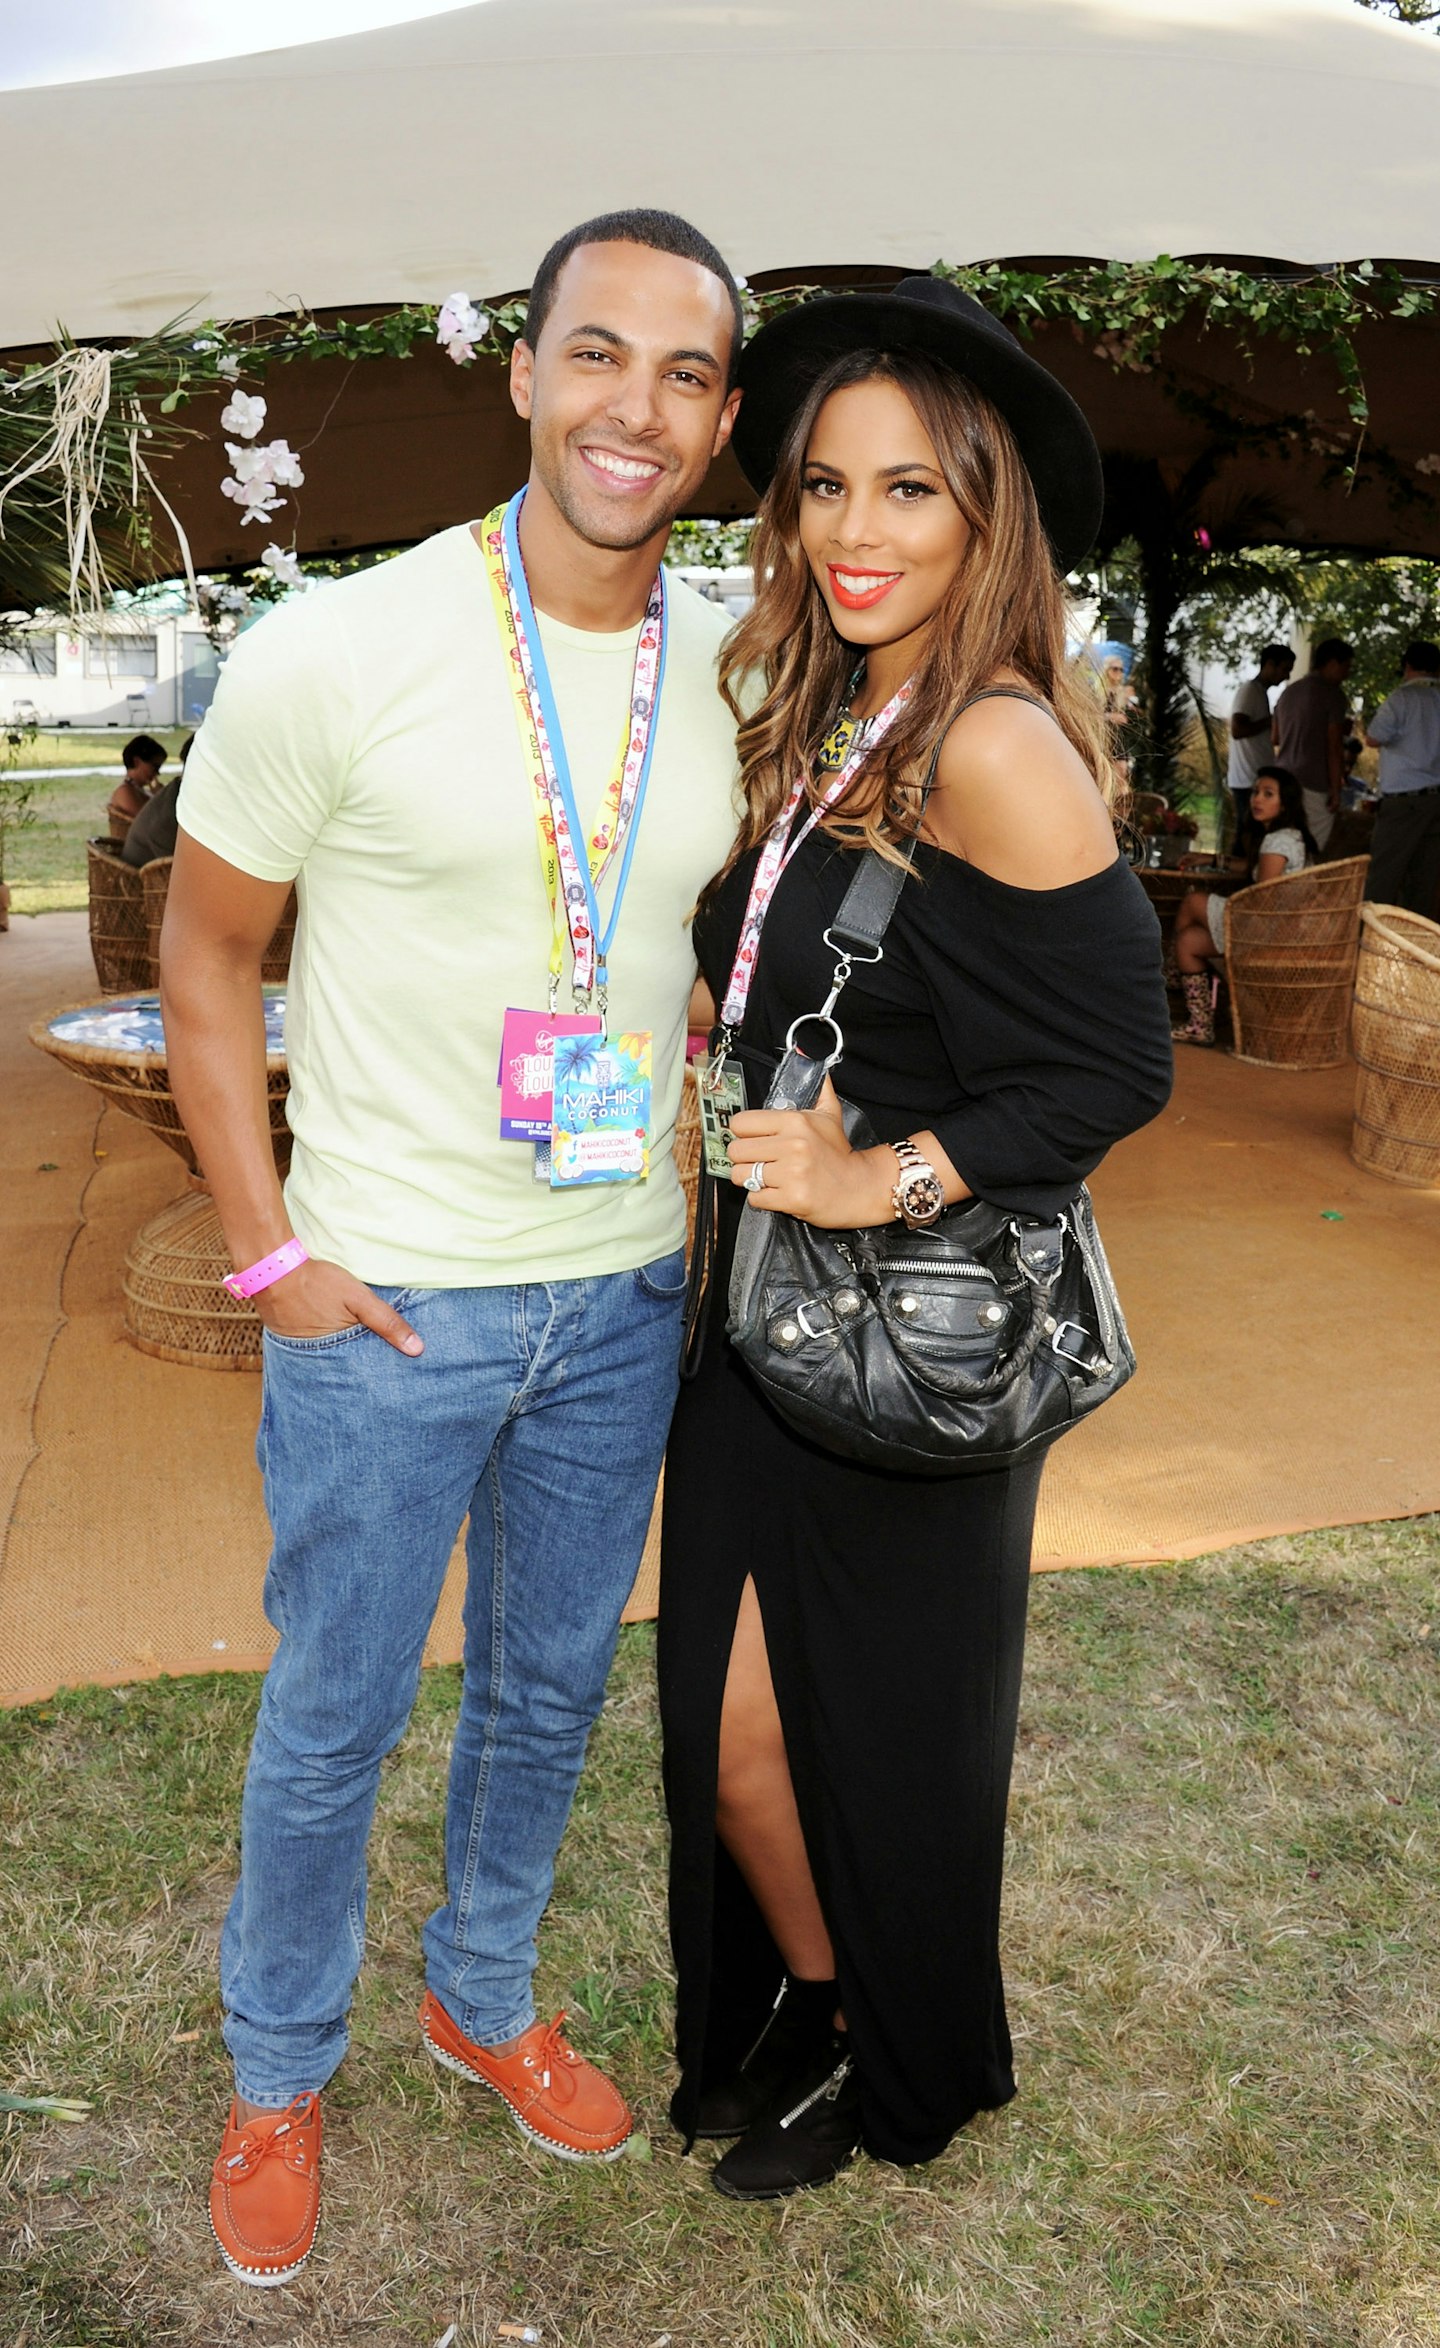 Rochelle and Marvin Humes